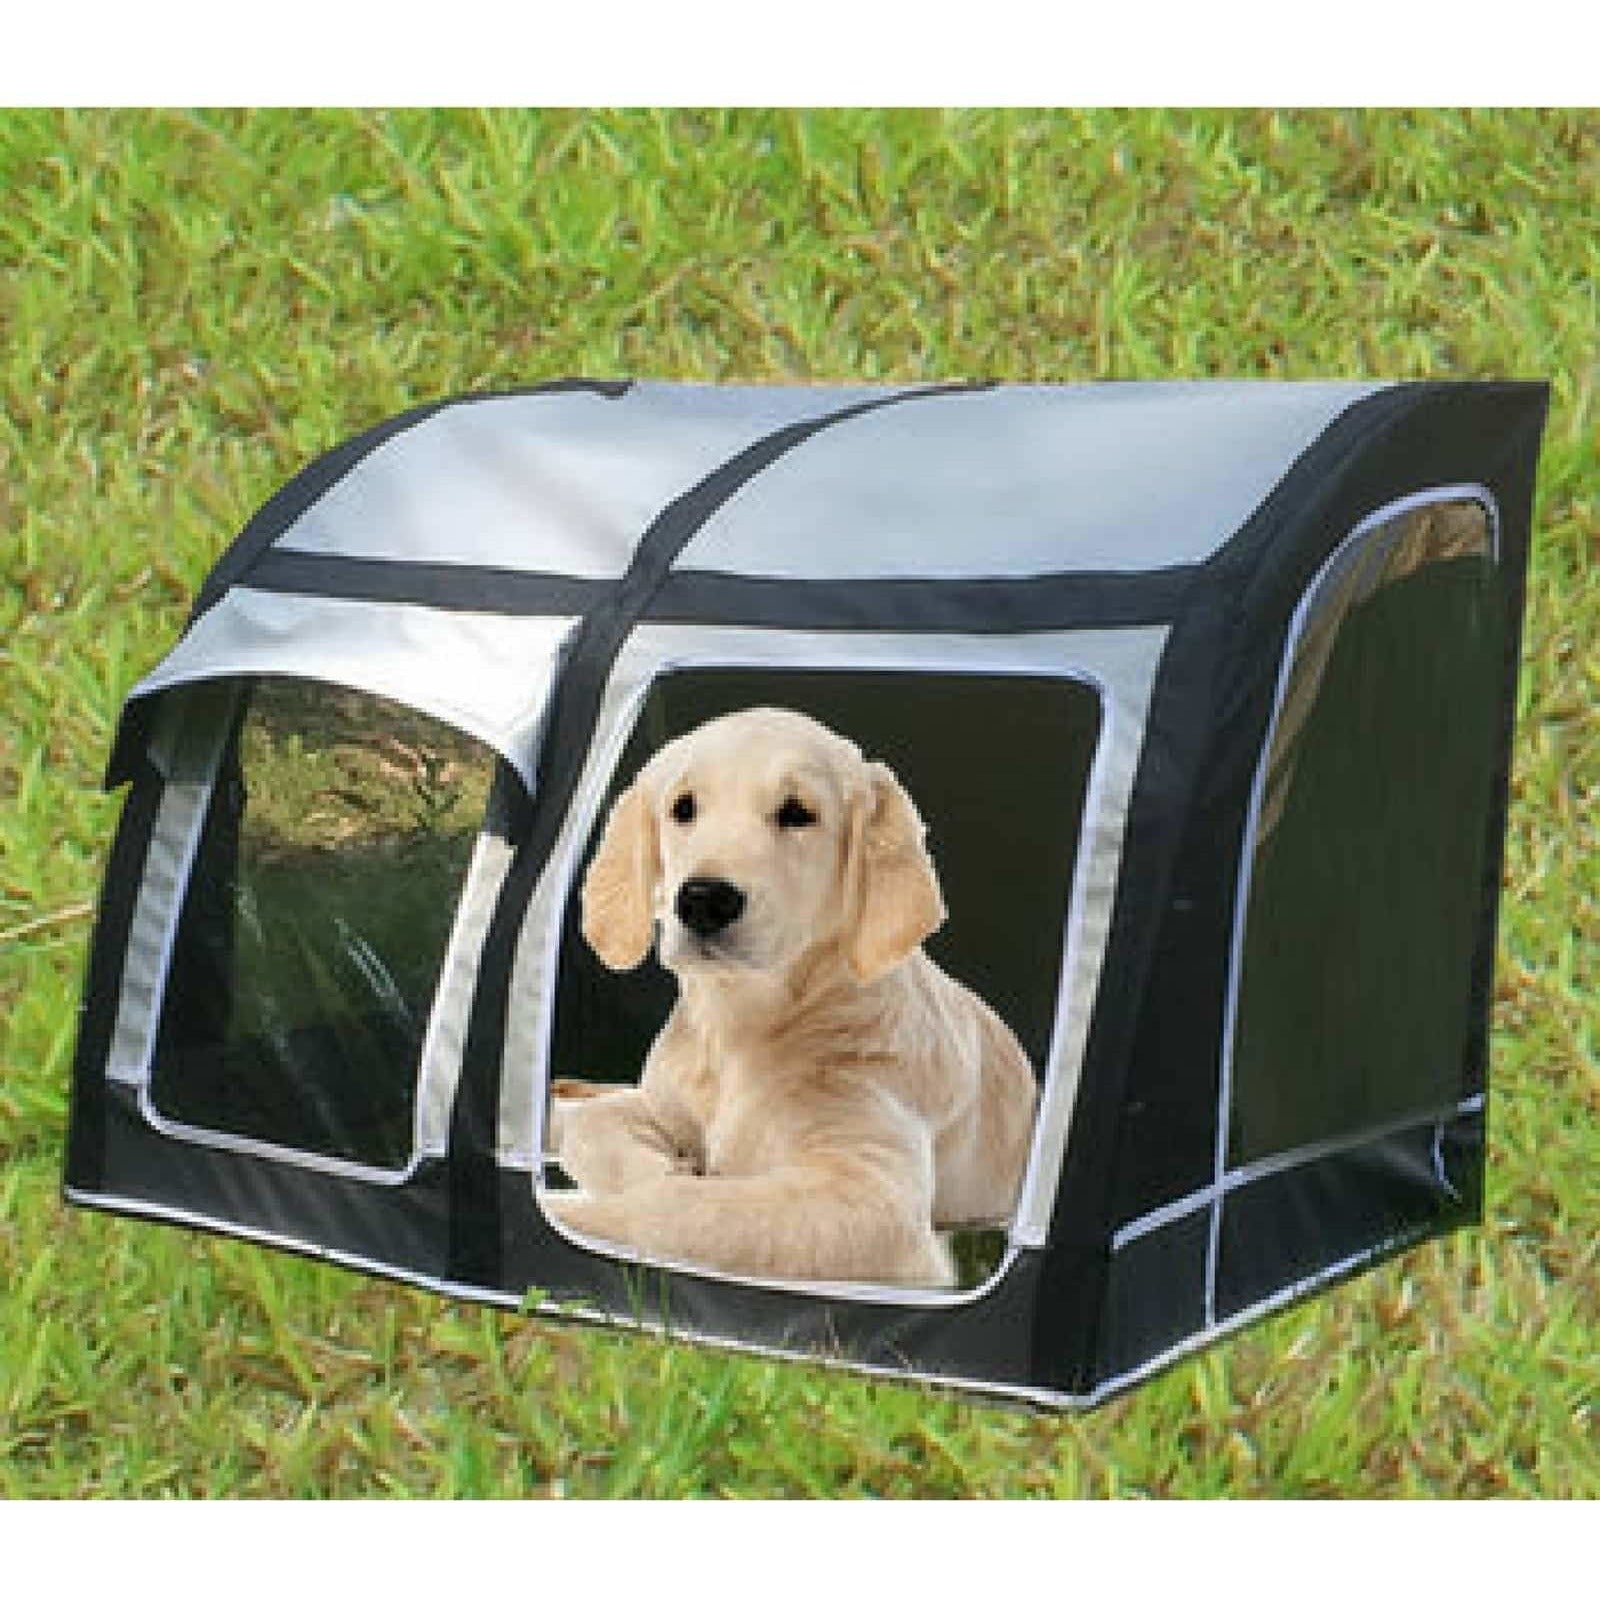 Camptech Pet House - Inflatable style awning for Cats, Dogs & Pets SL5005 (2019) made by CampTech. A Pet House sold by Quality Caravan Awnings